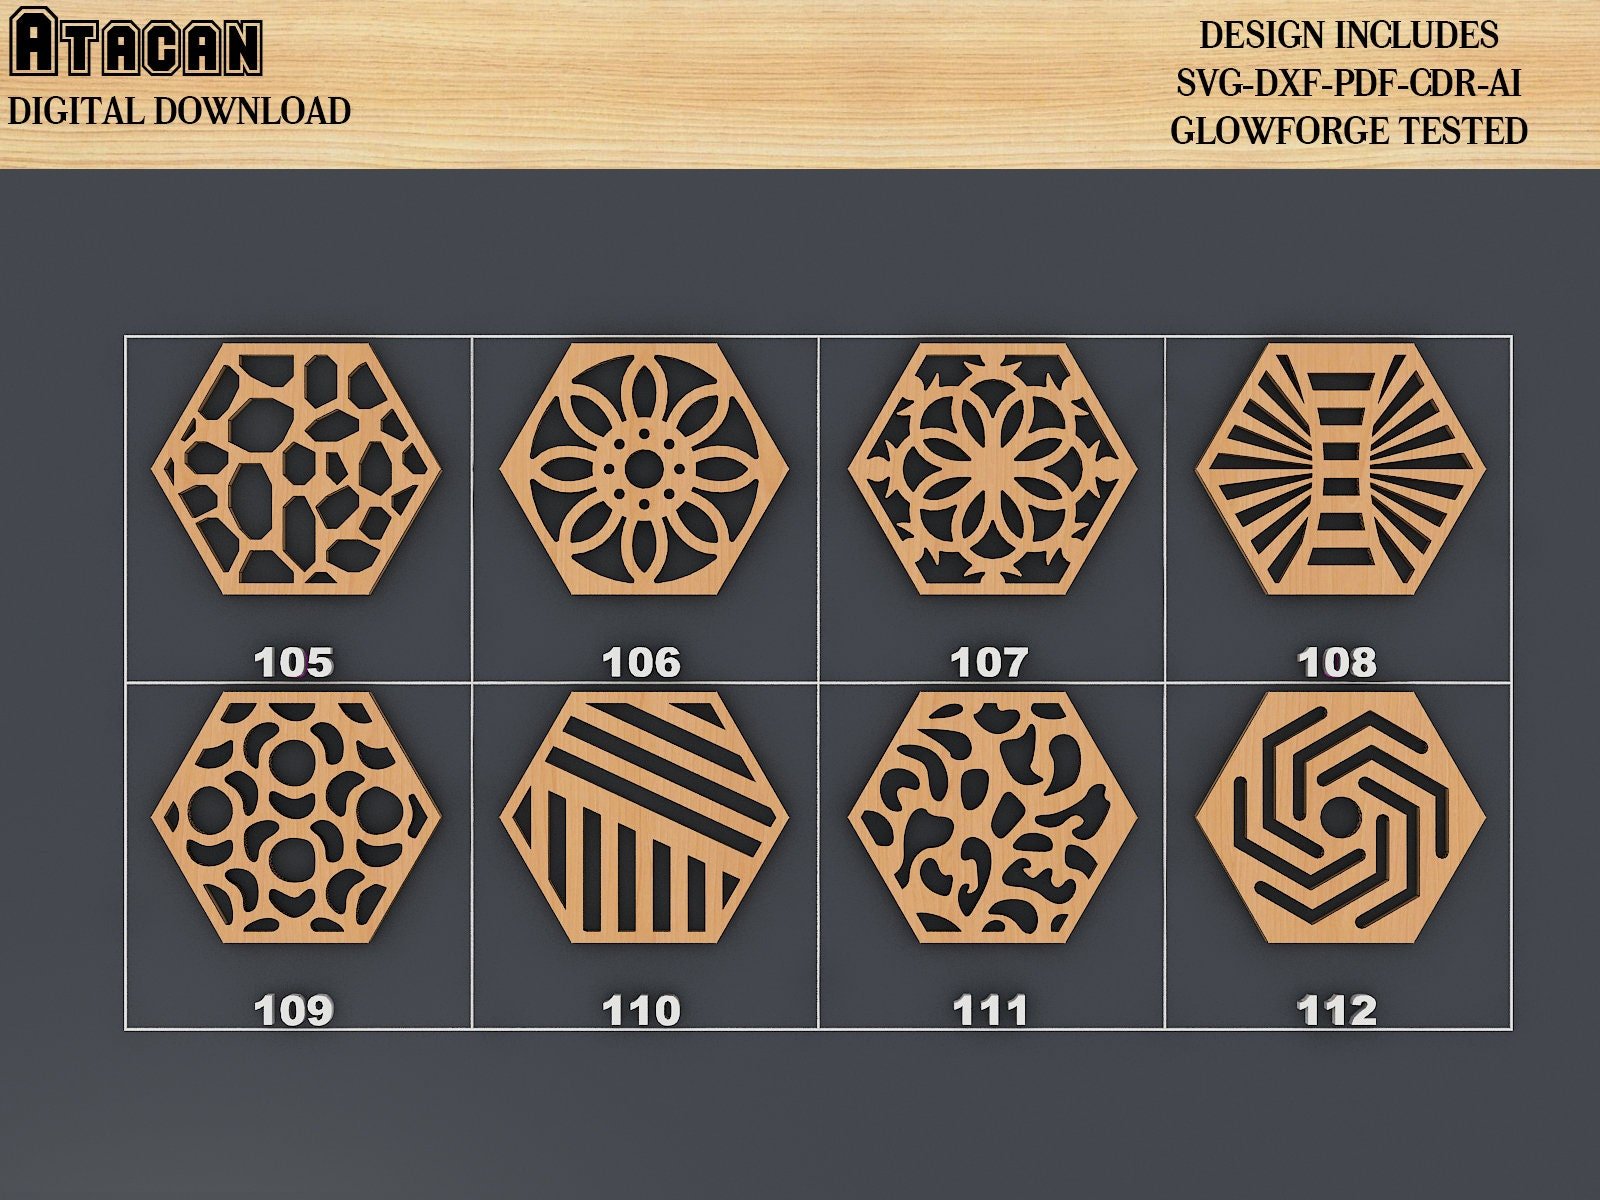 40 Drink Coasters SVG Laser cut files, Wall Decor vector files, CNC Laser cut Glowforge SVG File - Total 200 Files 341